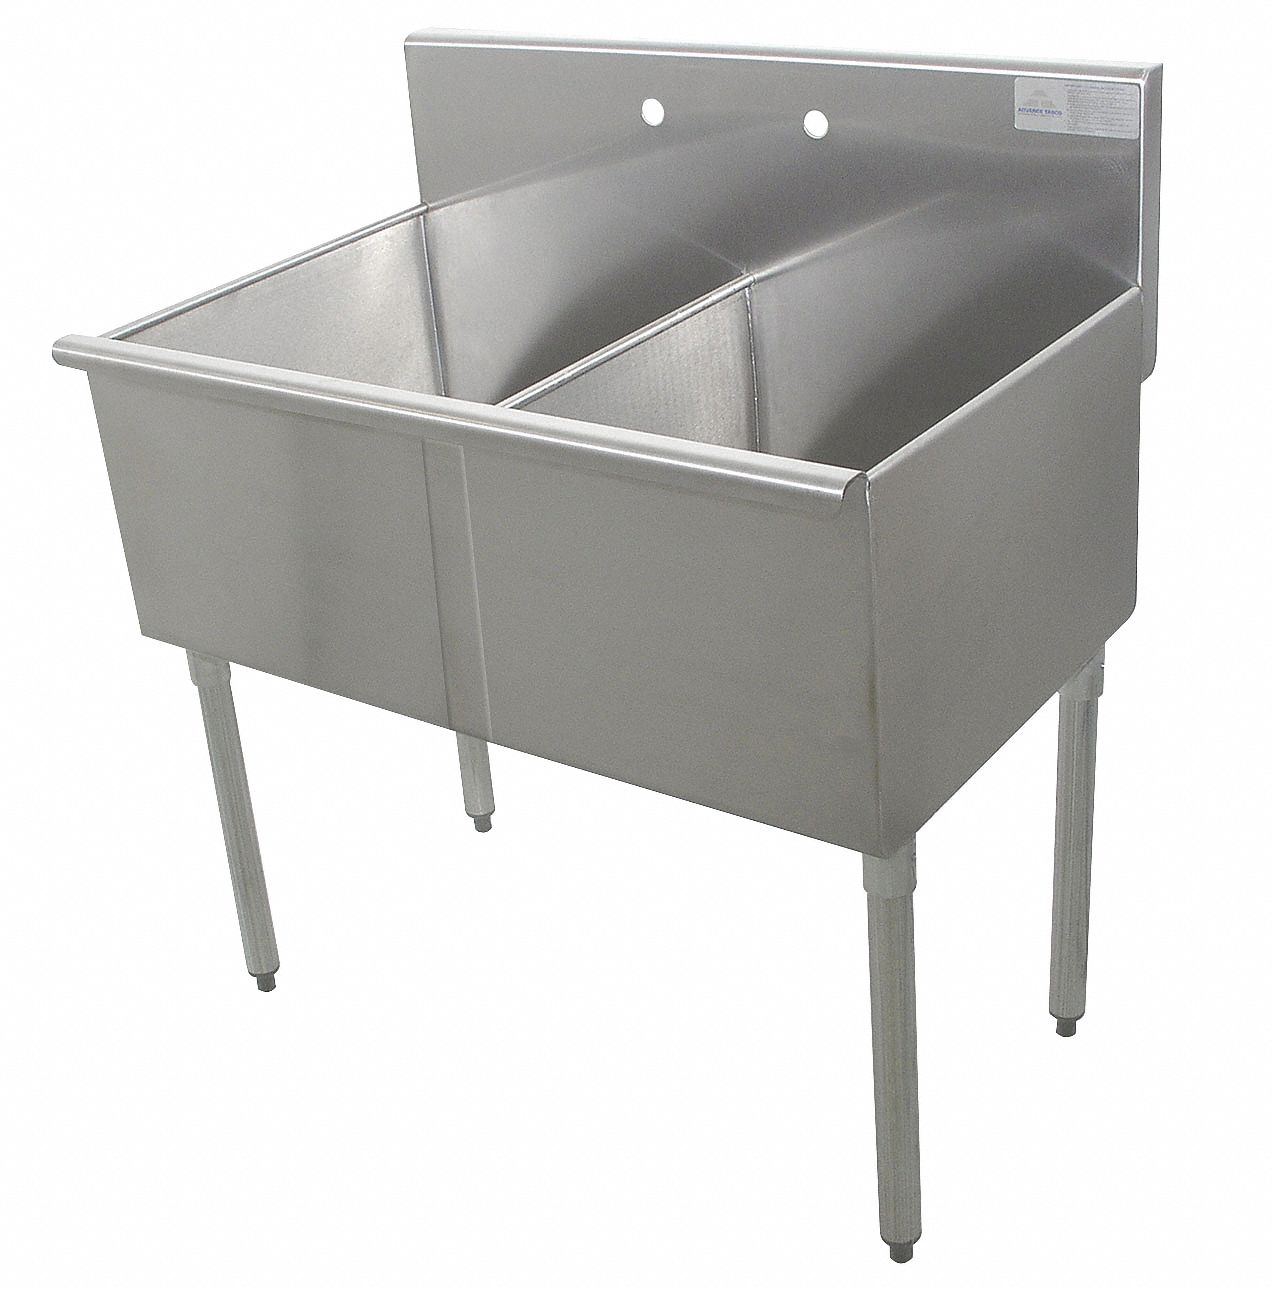 Floor Mount Utility Sink 2 Bowl Stainless 48 L X 24 1 2 W X 41 H